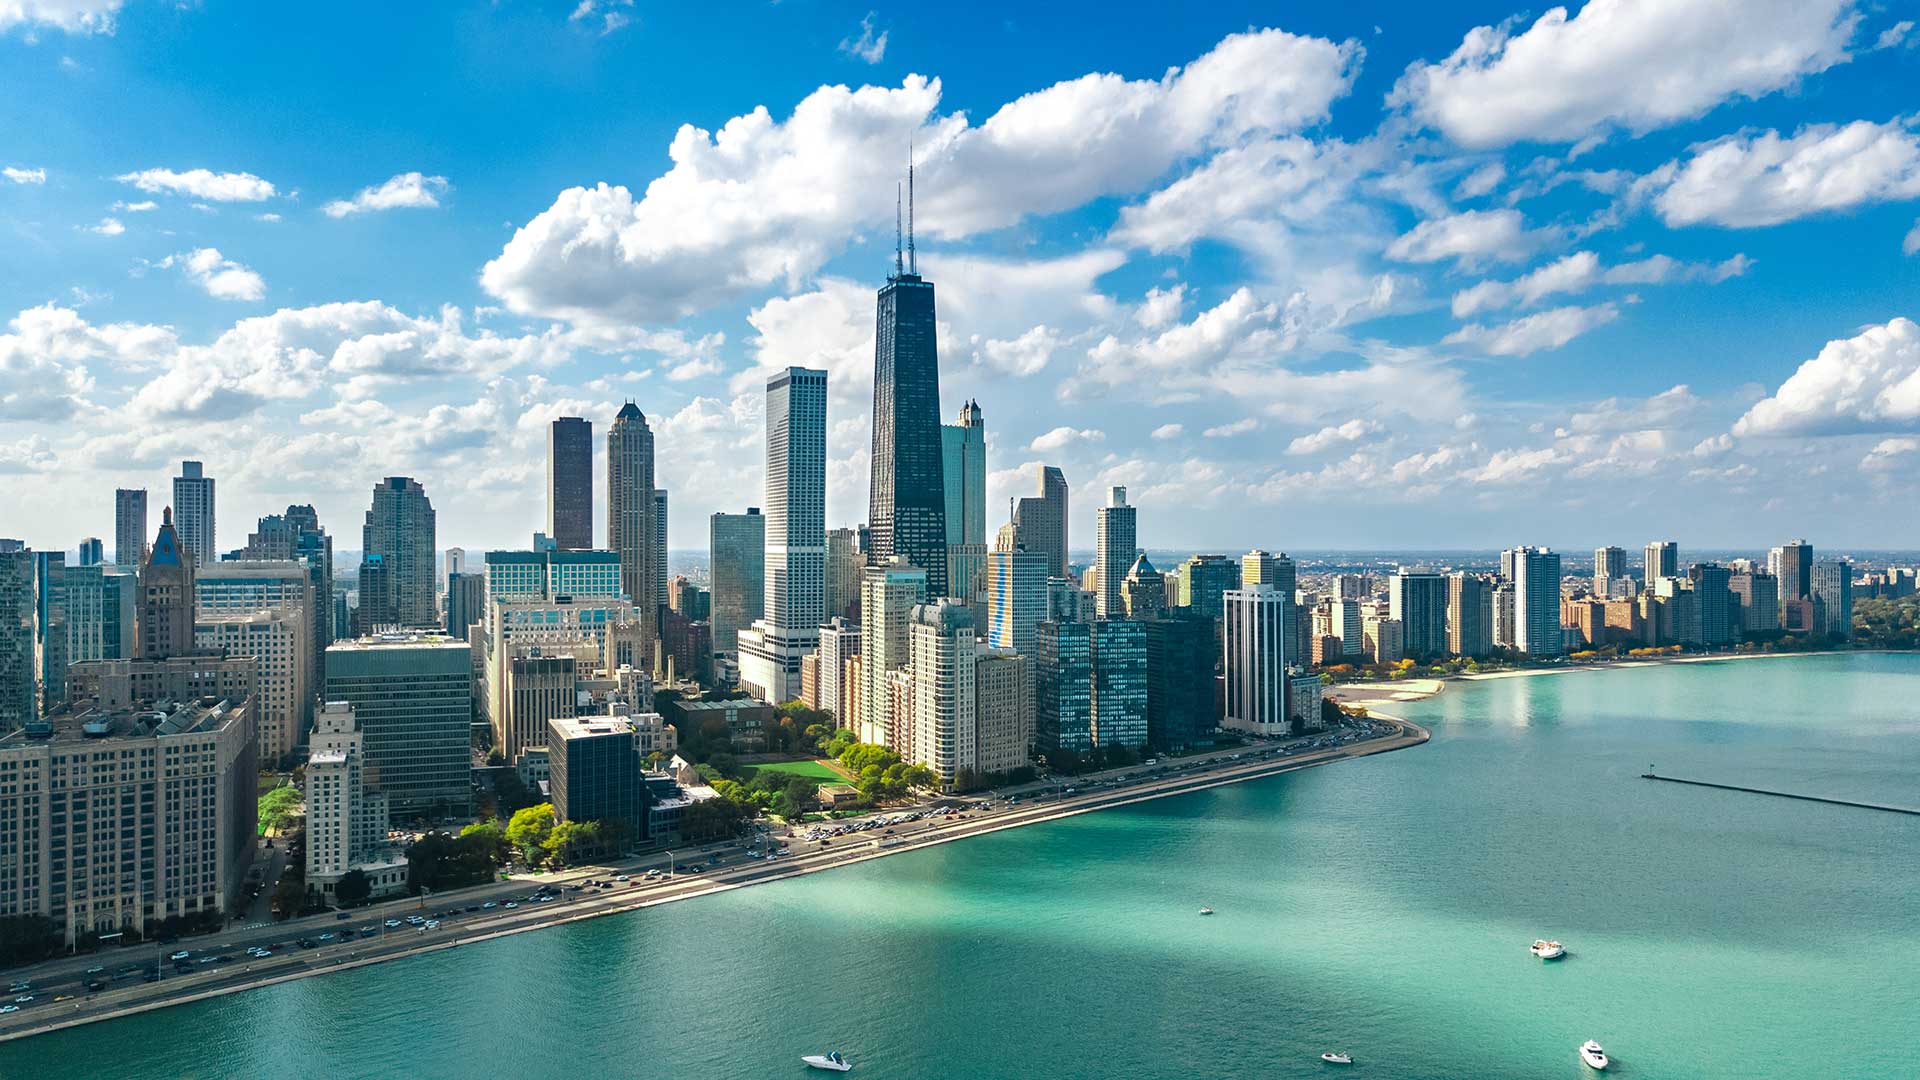 The Chicago skyline as seen from a drone over Lake Michigan on a partially cloudy day.